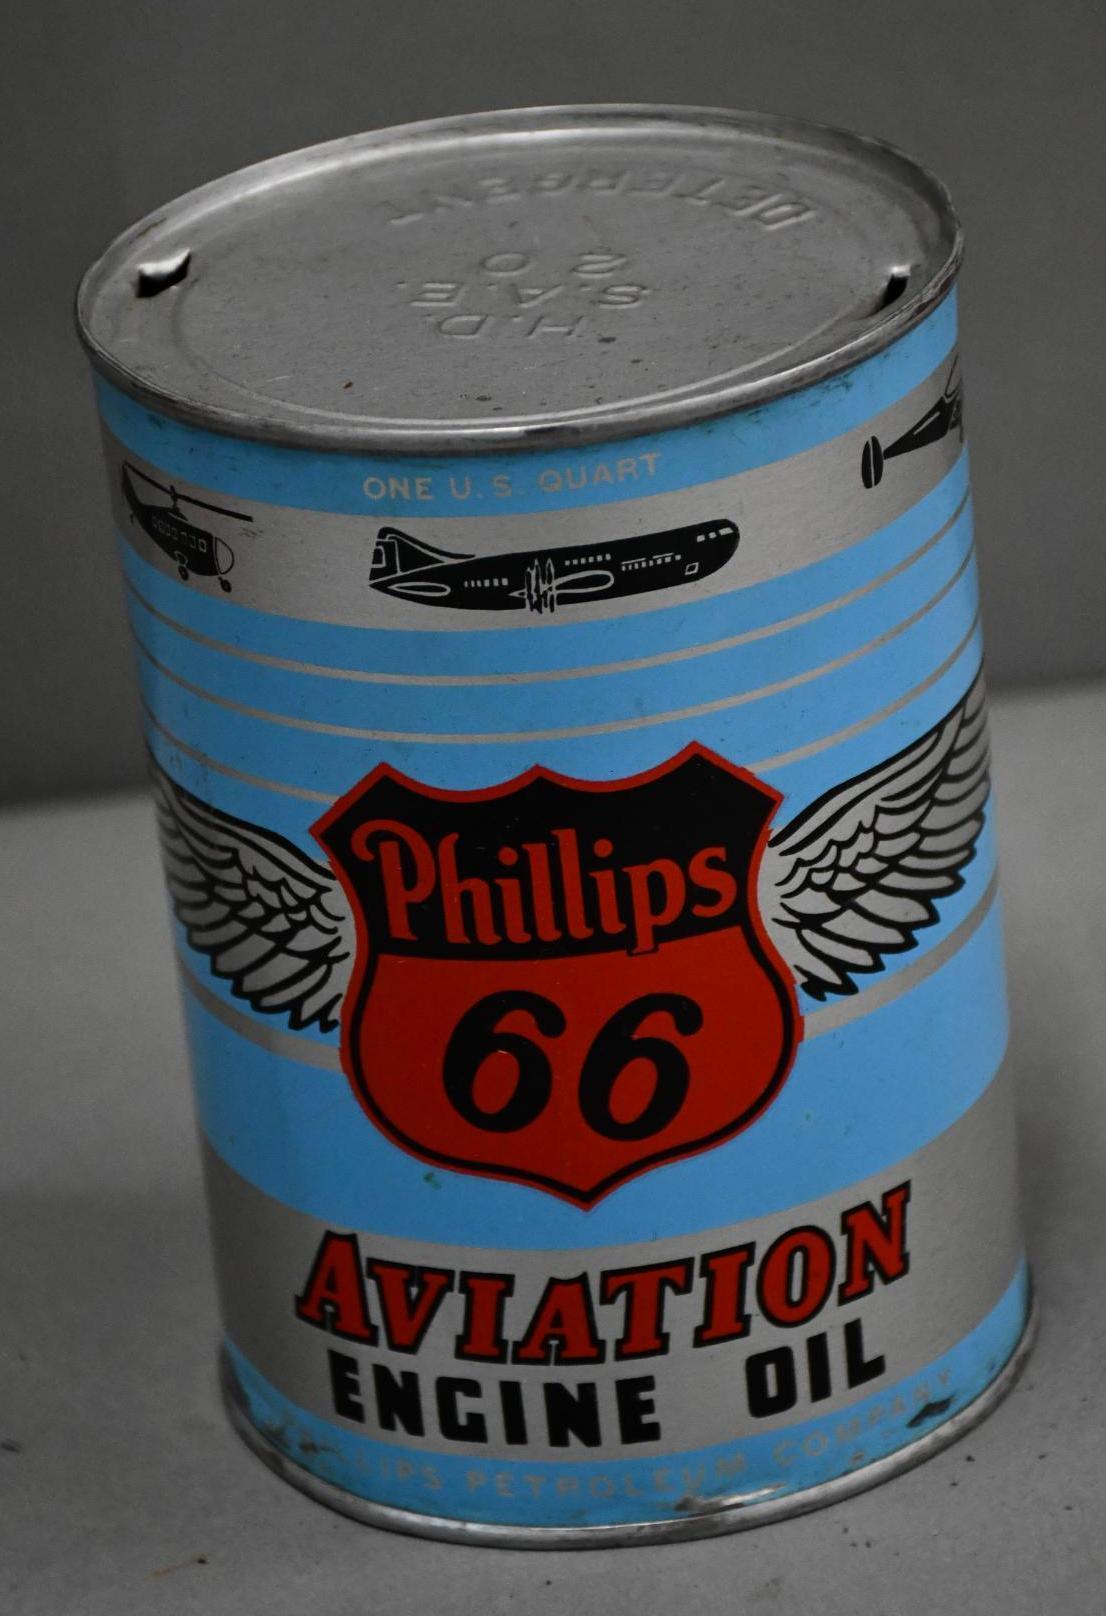 Phillips Aviation Engine Oil One Quart Metal Can